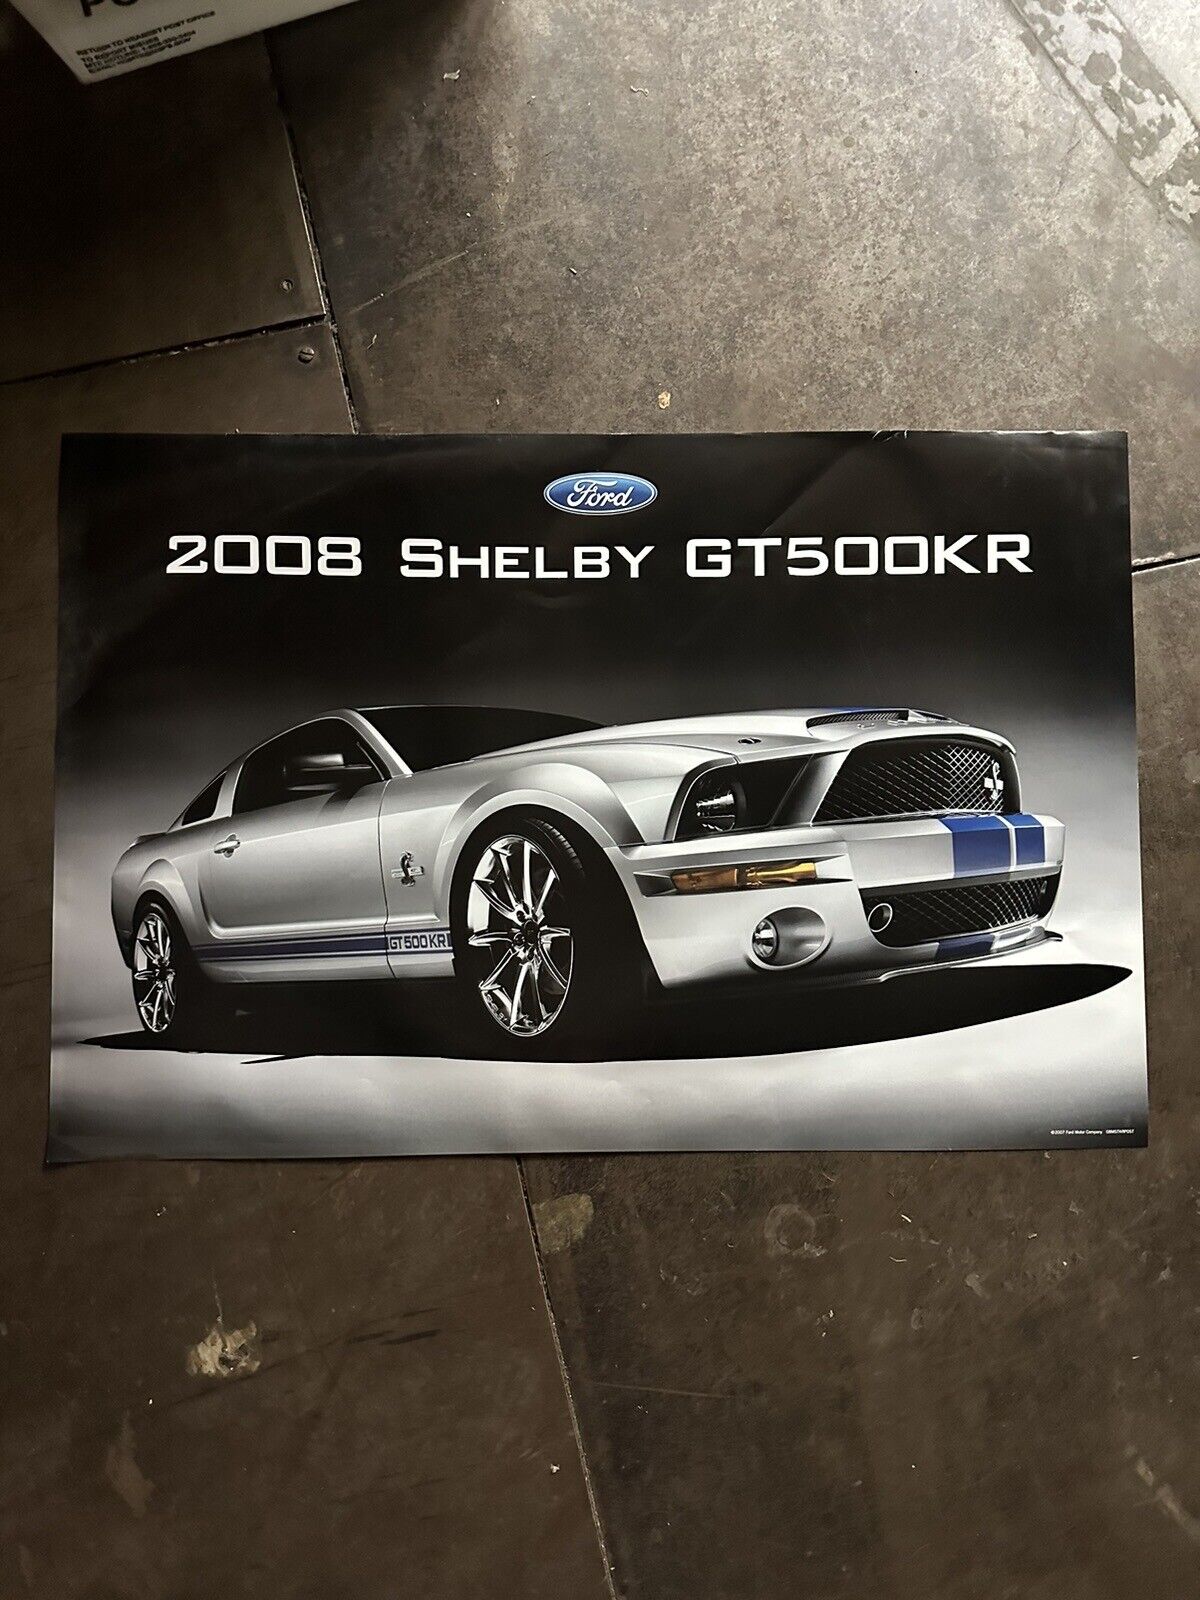 NEW 2008 FORD MUSTANG SHELBY GT-500KR GT500KR DEALERSHIP PROMO POSTER 24x36